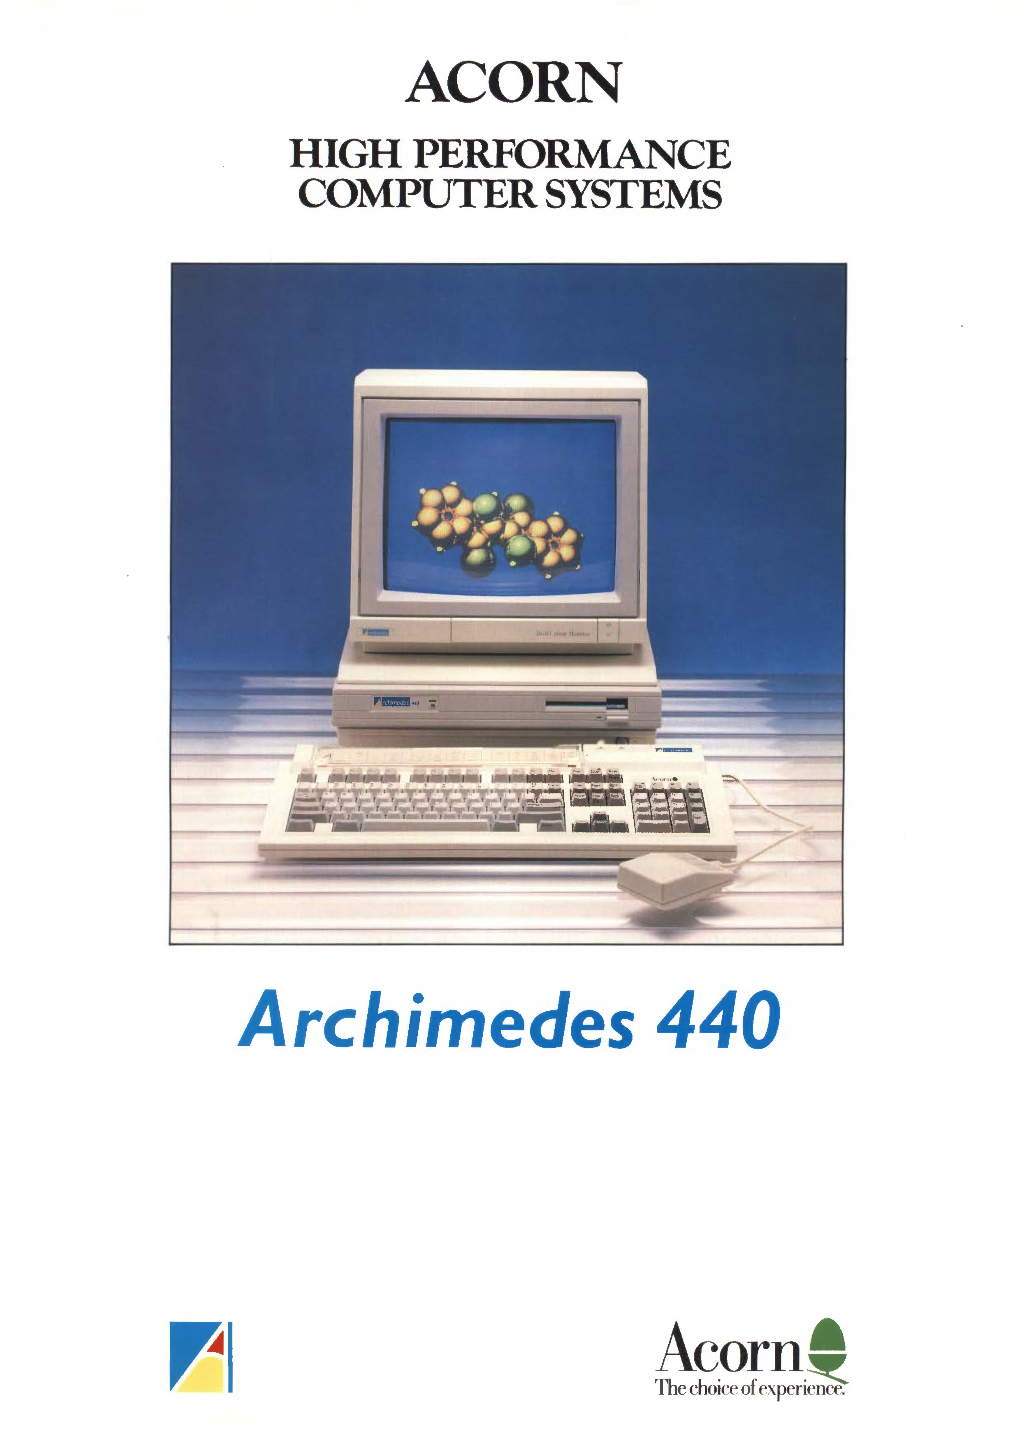 Archimedes 440